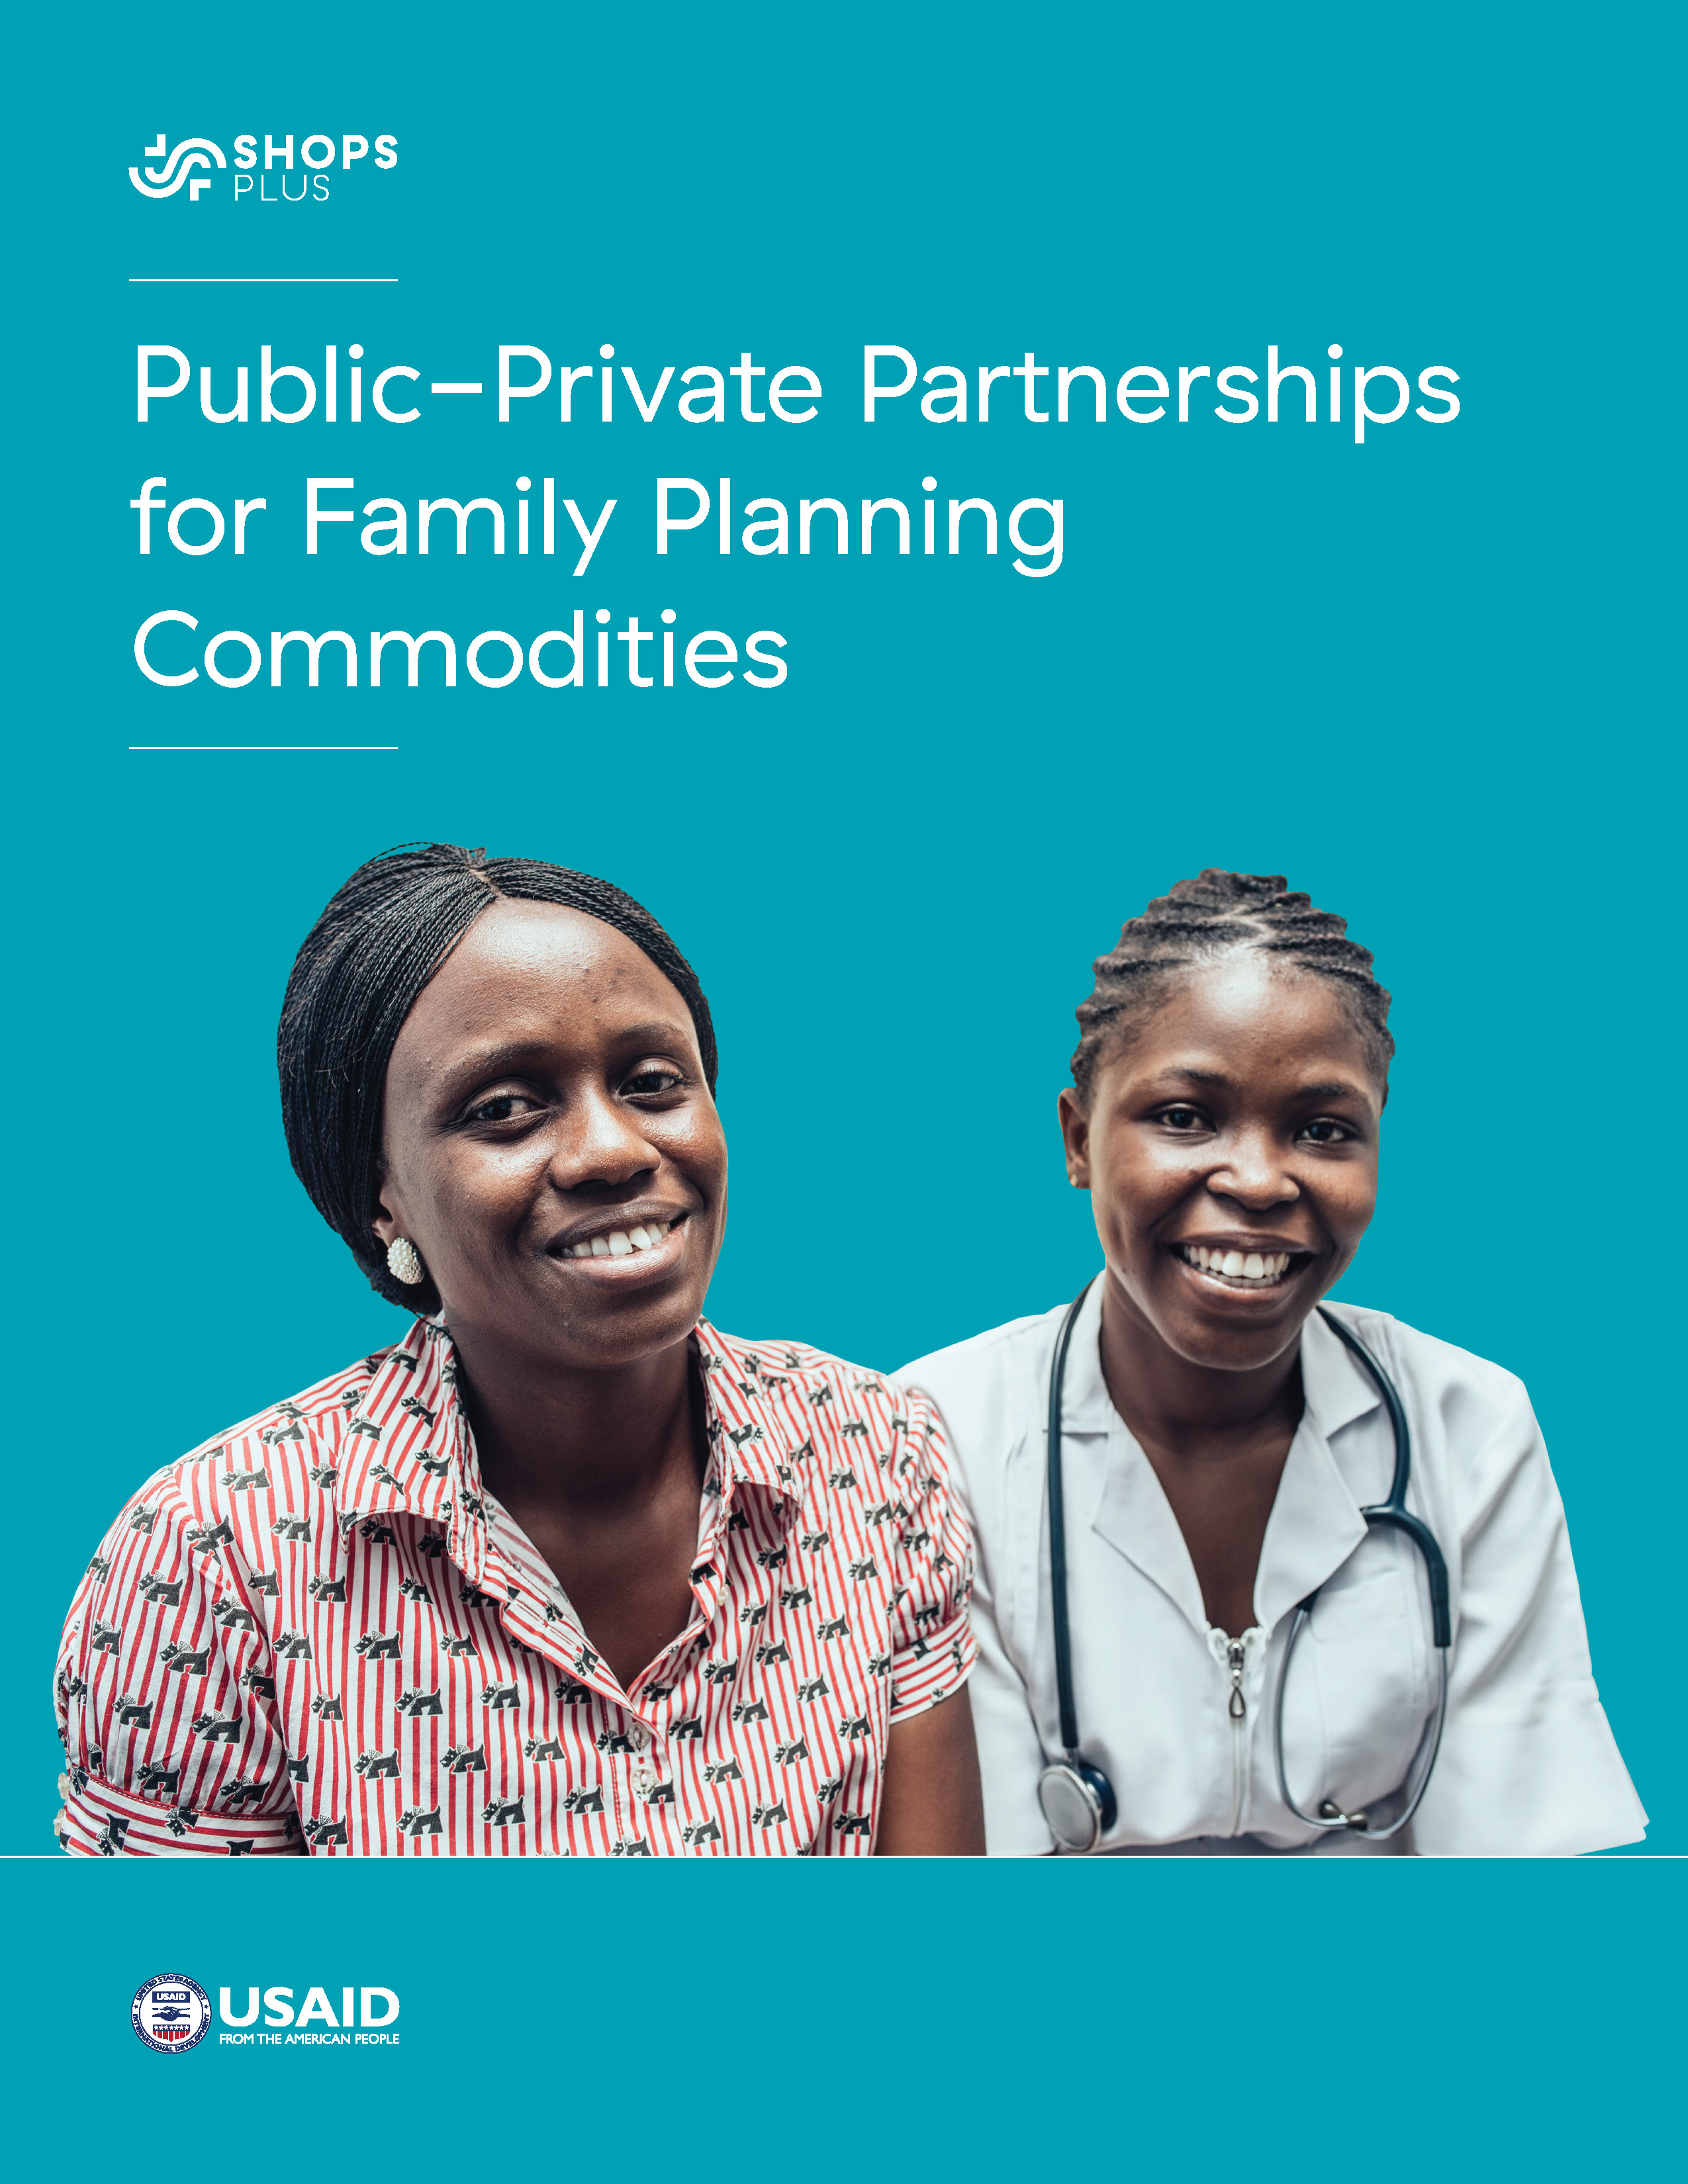 Cover for the brief Public-Private Partnerships for Family Planning Commodities